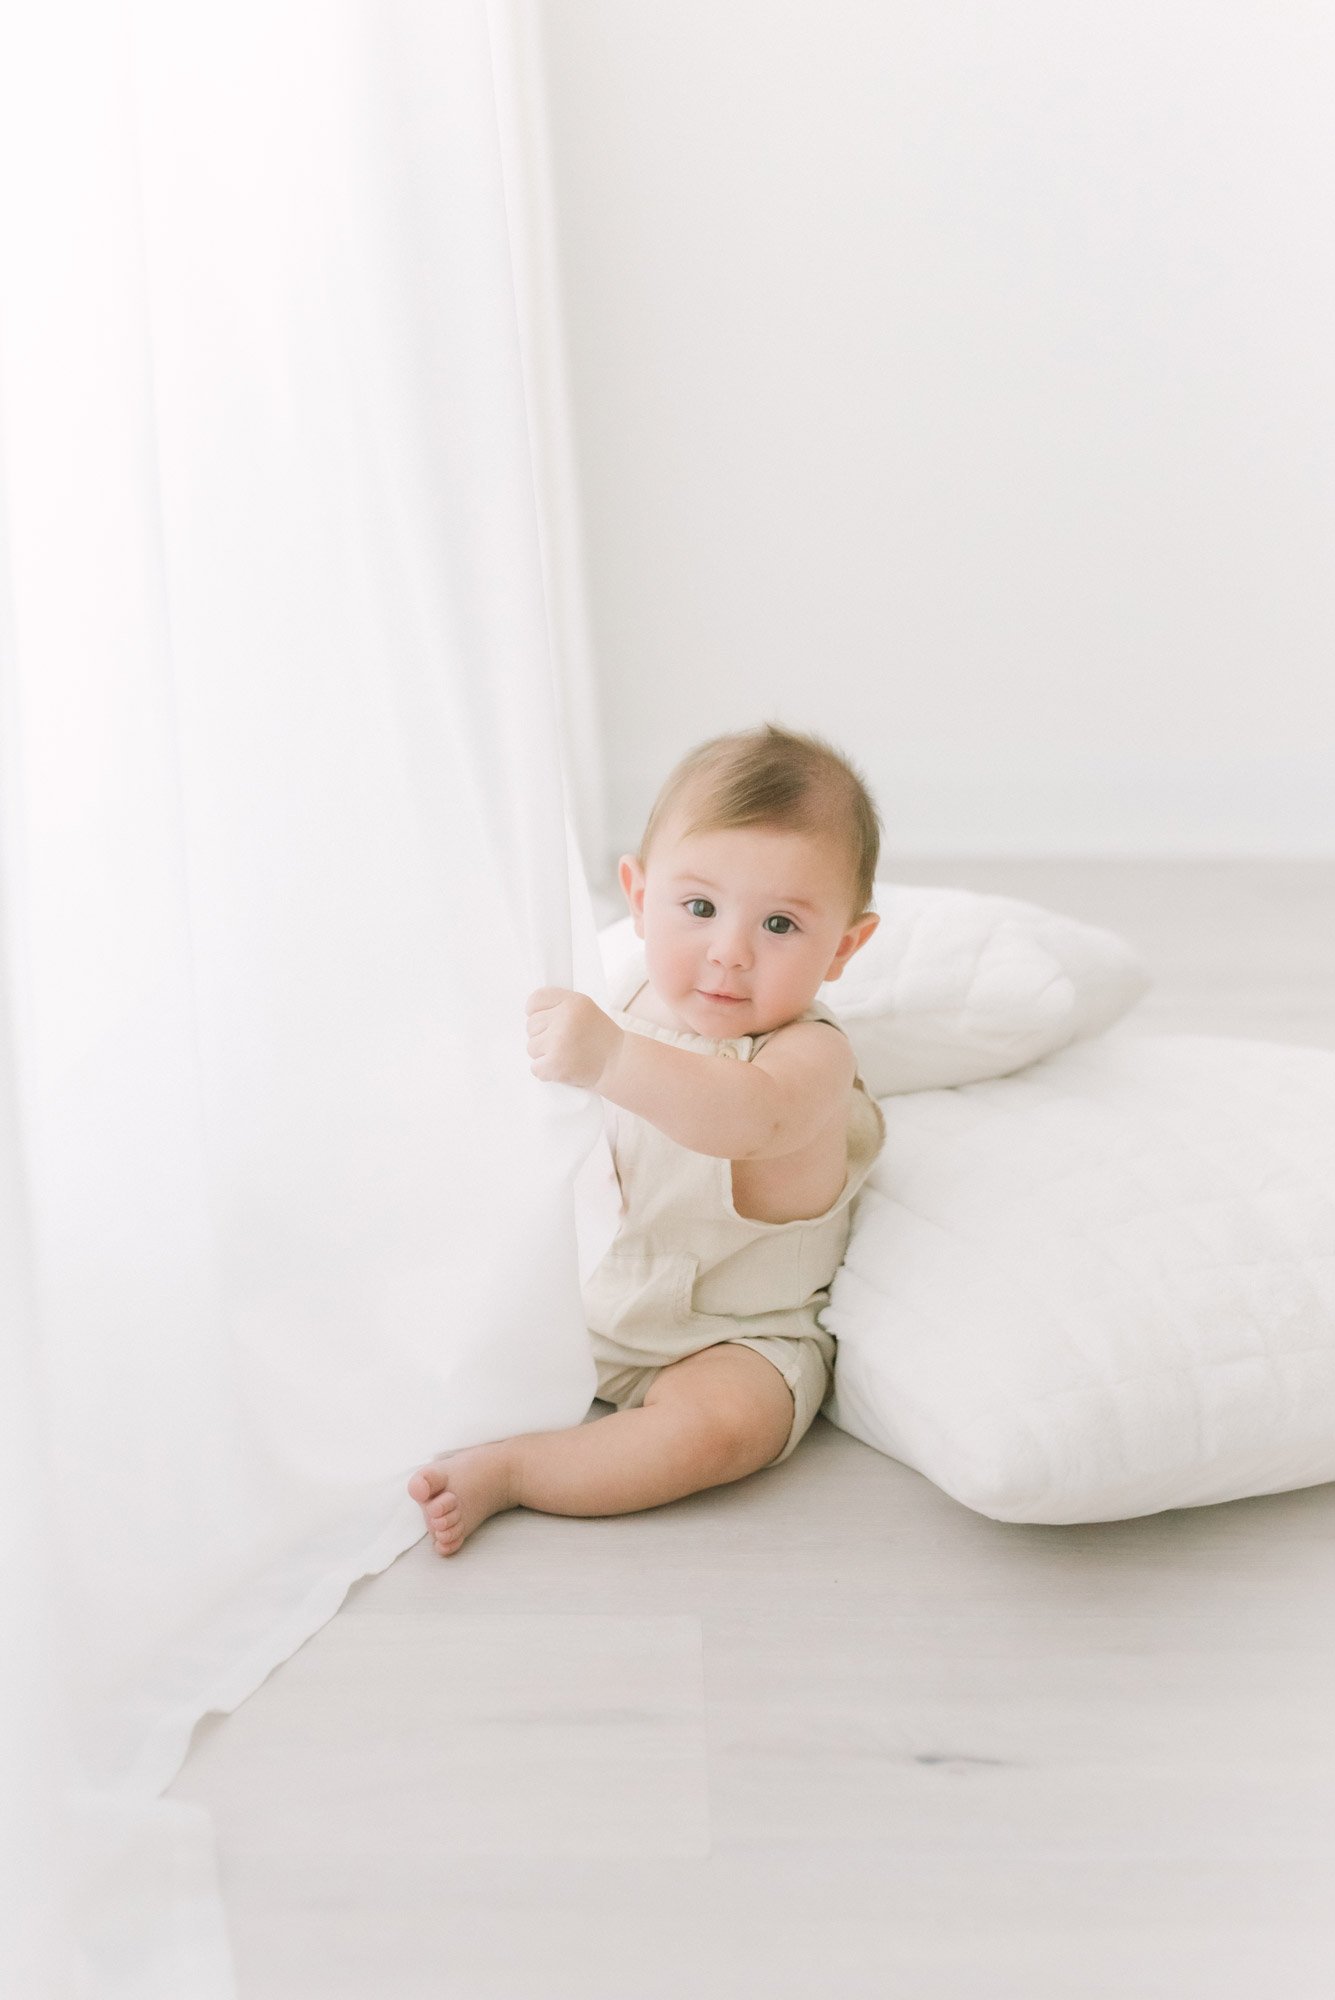 SIX MONTH BABY PHOTOGRAPHY